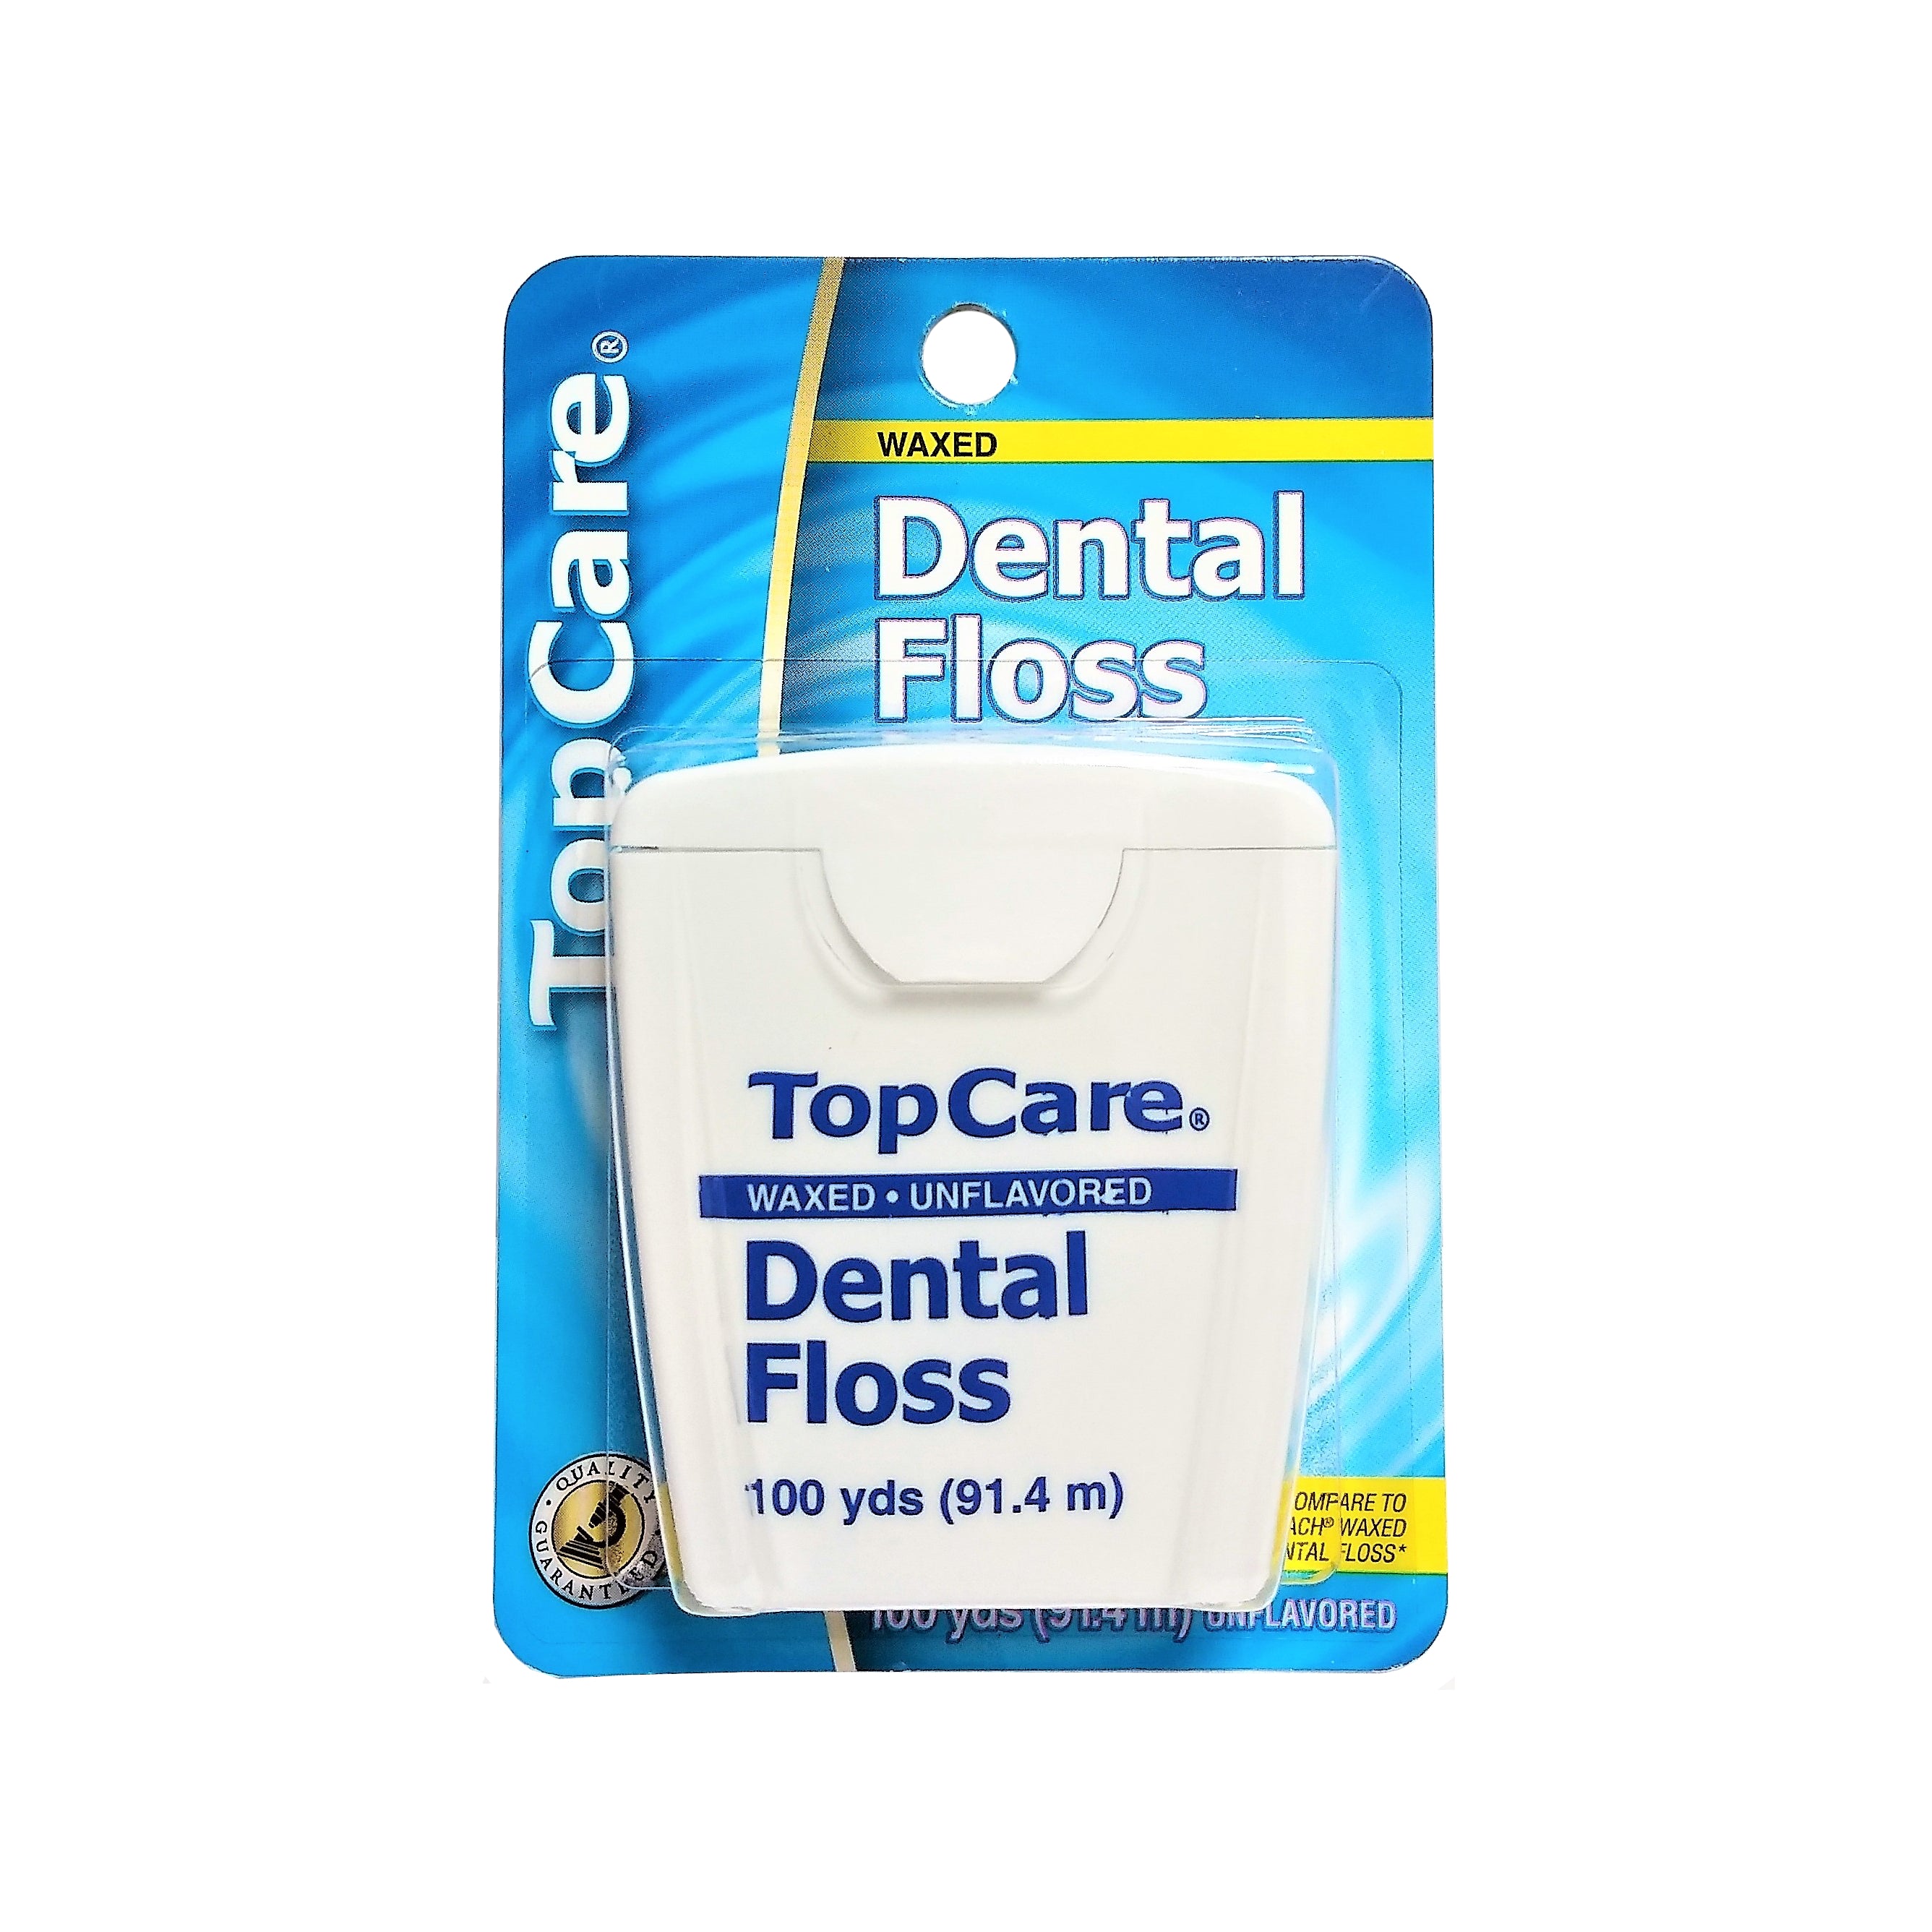 Top Care? Dental Floss,Waxed & Unflavored,100 yds.,1 Each, By Topco Associates LLC